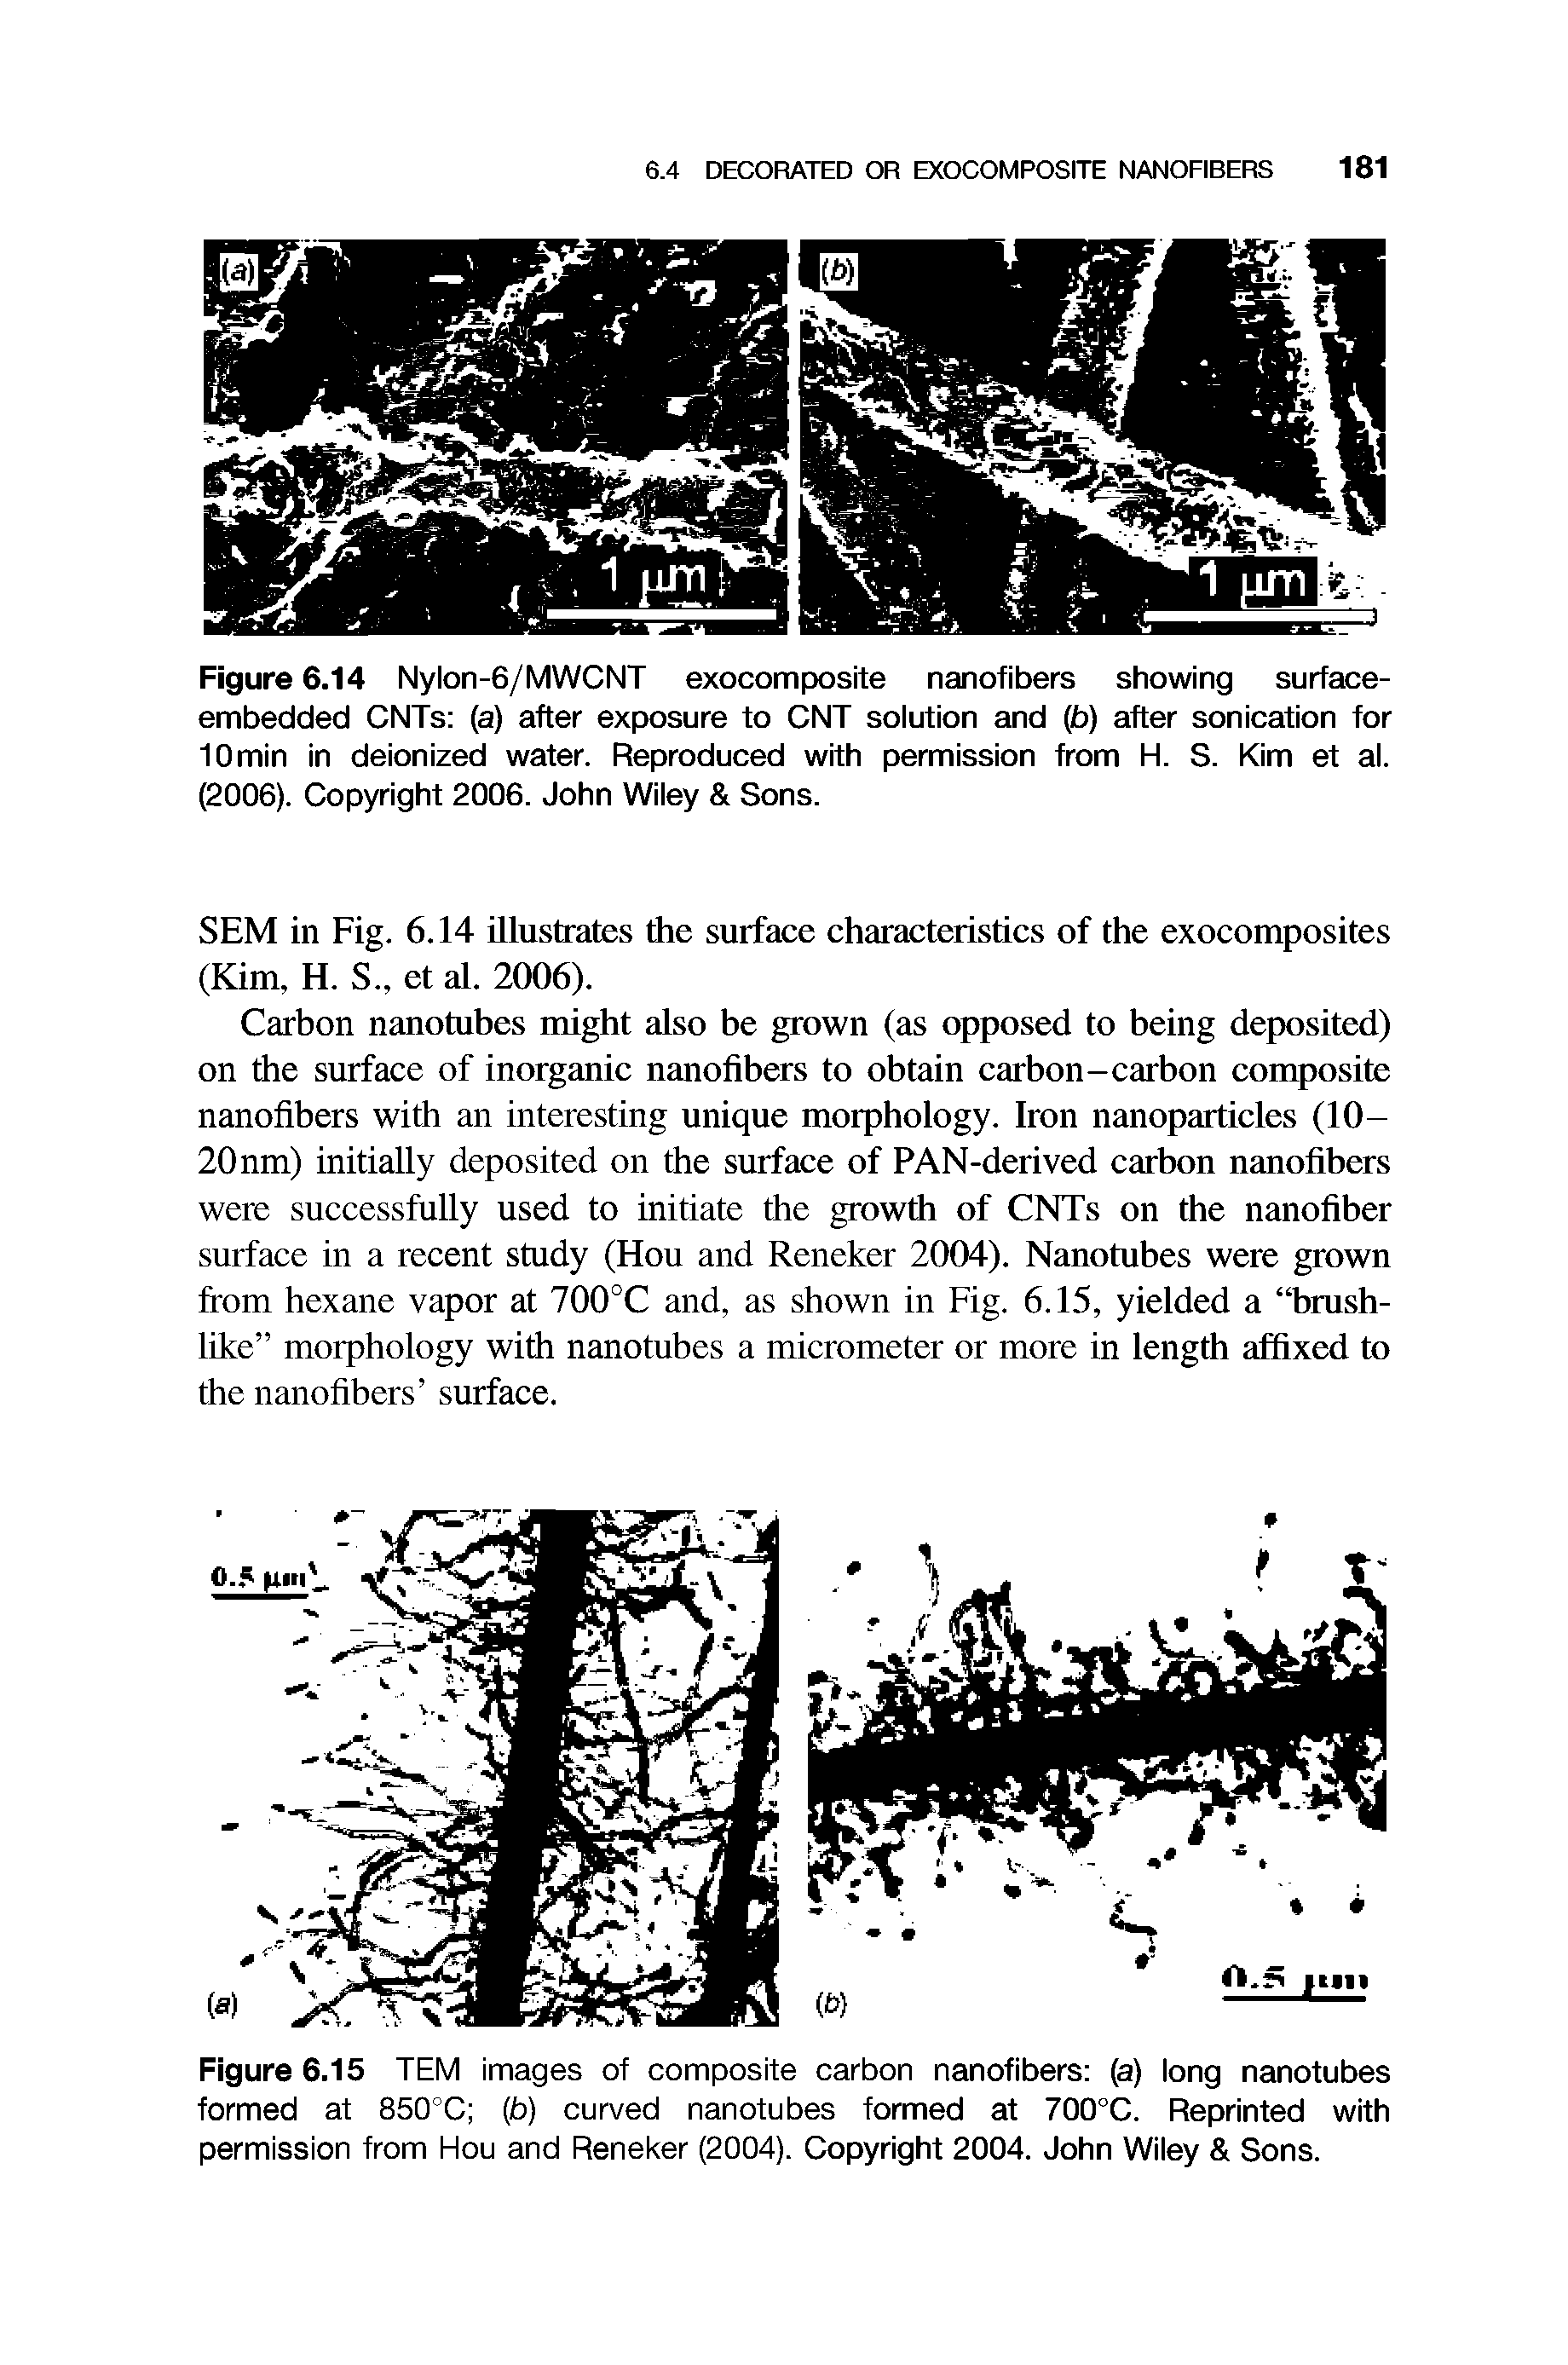 Figure 6.15 TEM images of composite carbon nanofibers (a) long nanotubes formed at 850°C (b) curved nanotubes formed at 700°C. Reprinted with permission from Hou and Reneker (2004). Copyright 2004. John Wiley Sons.